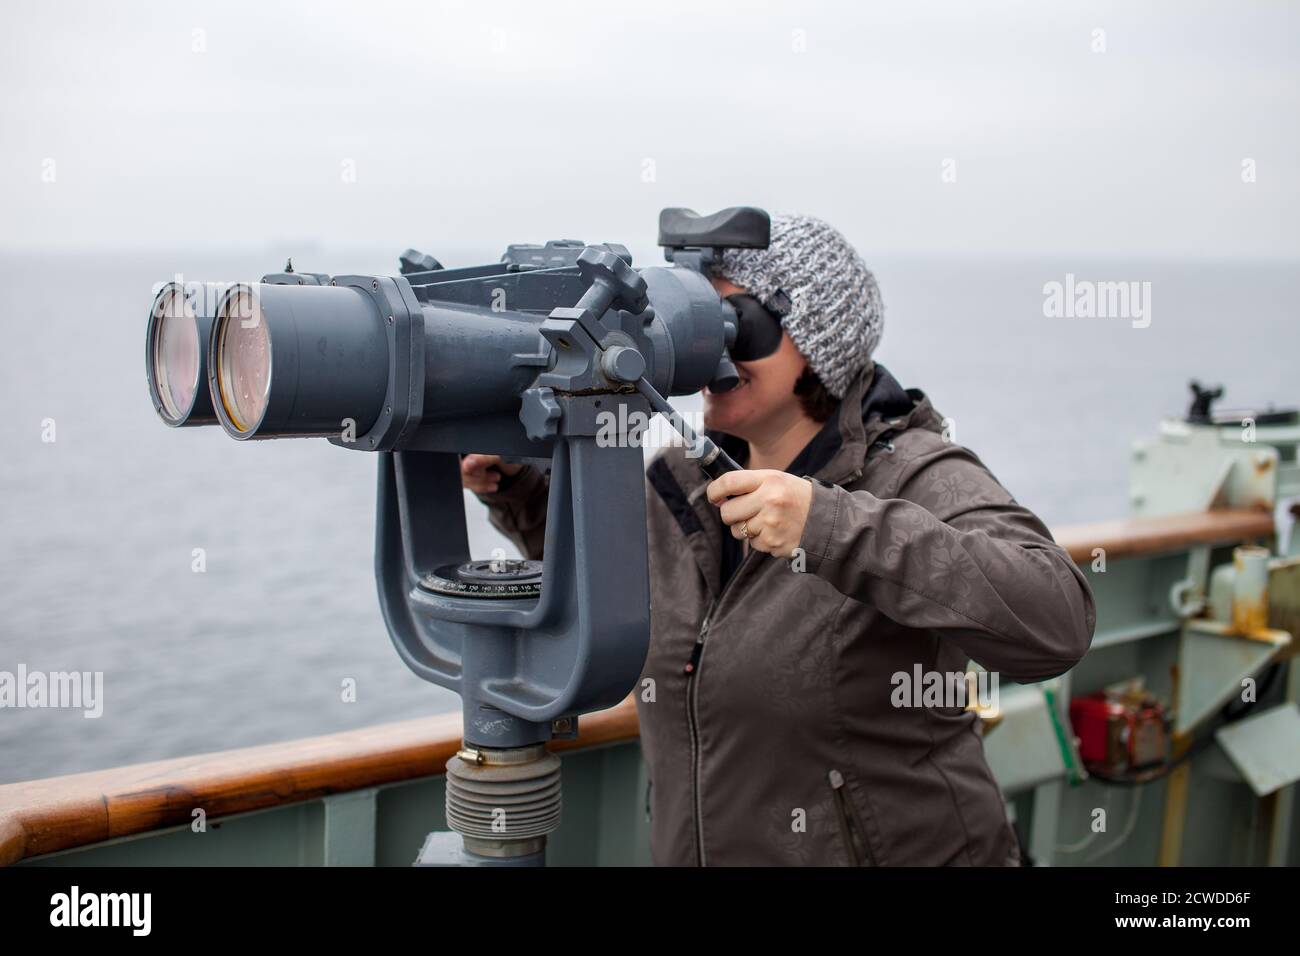 A young woman looks out through ship binoculars out into the open ocean at the Canadian Forces Base in Esquimalt, British Columbia, Canada Stock Photo